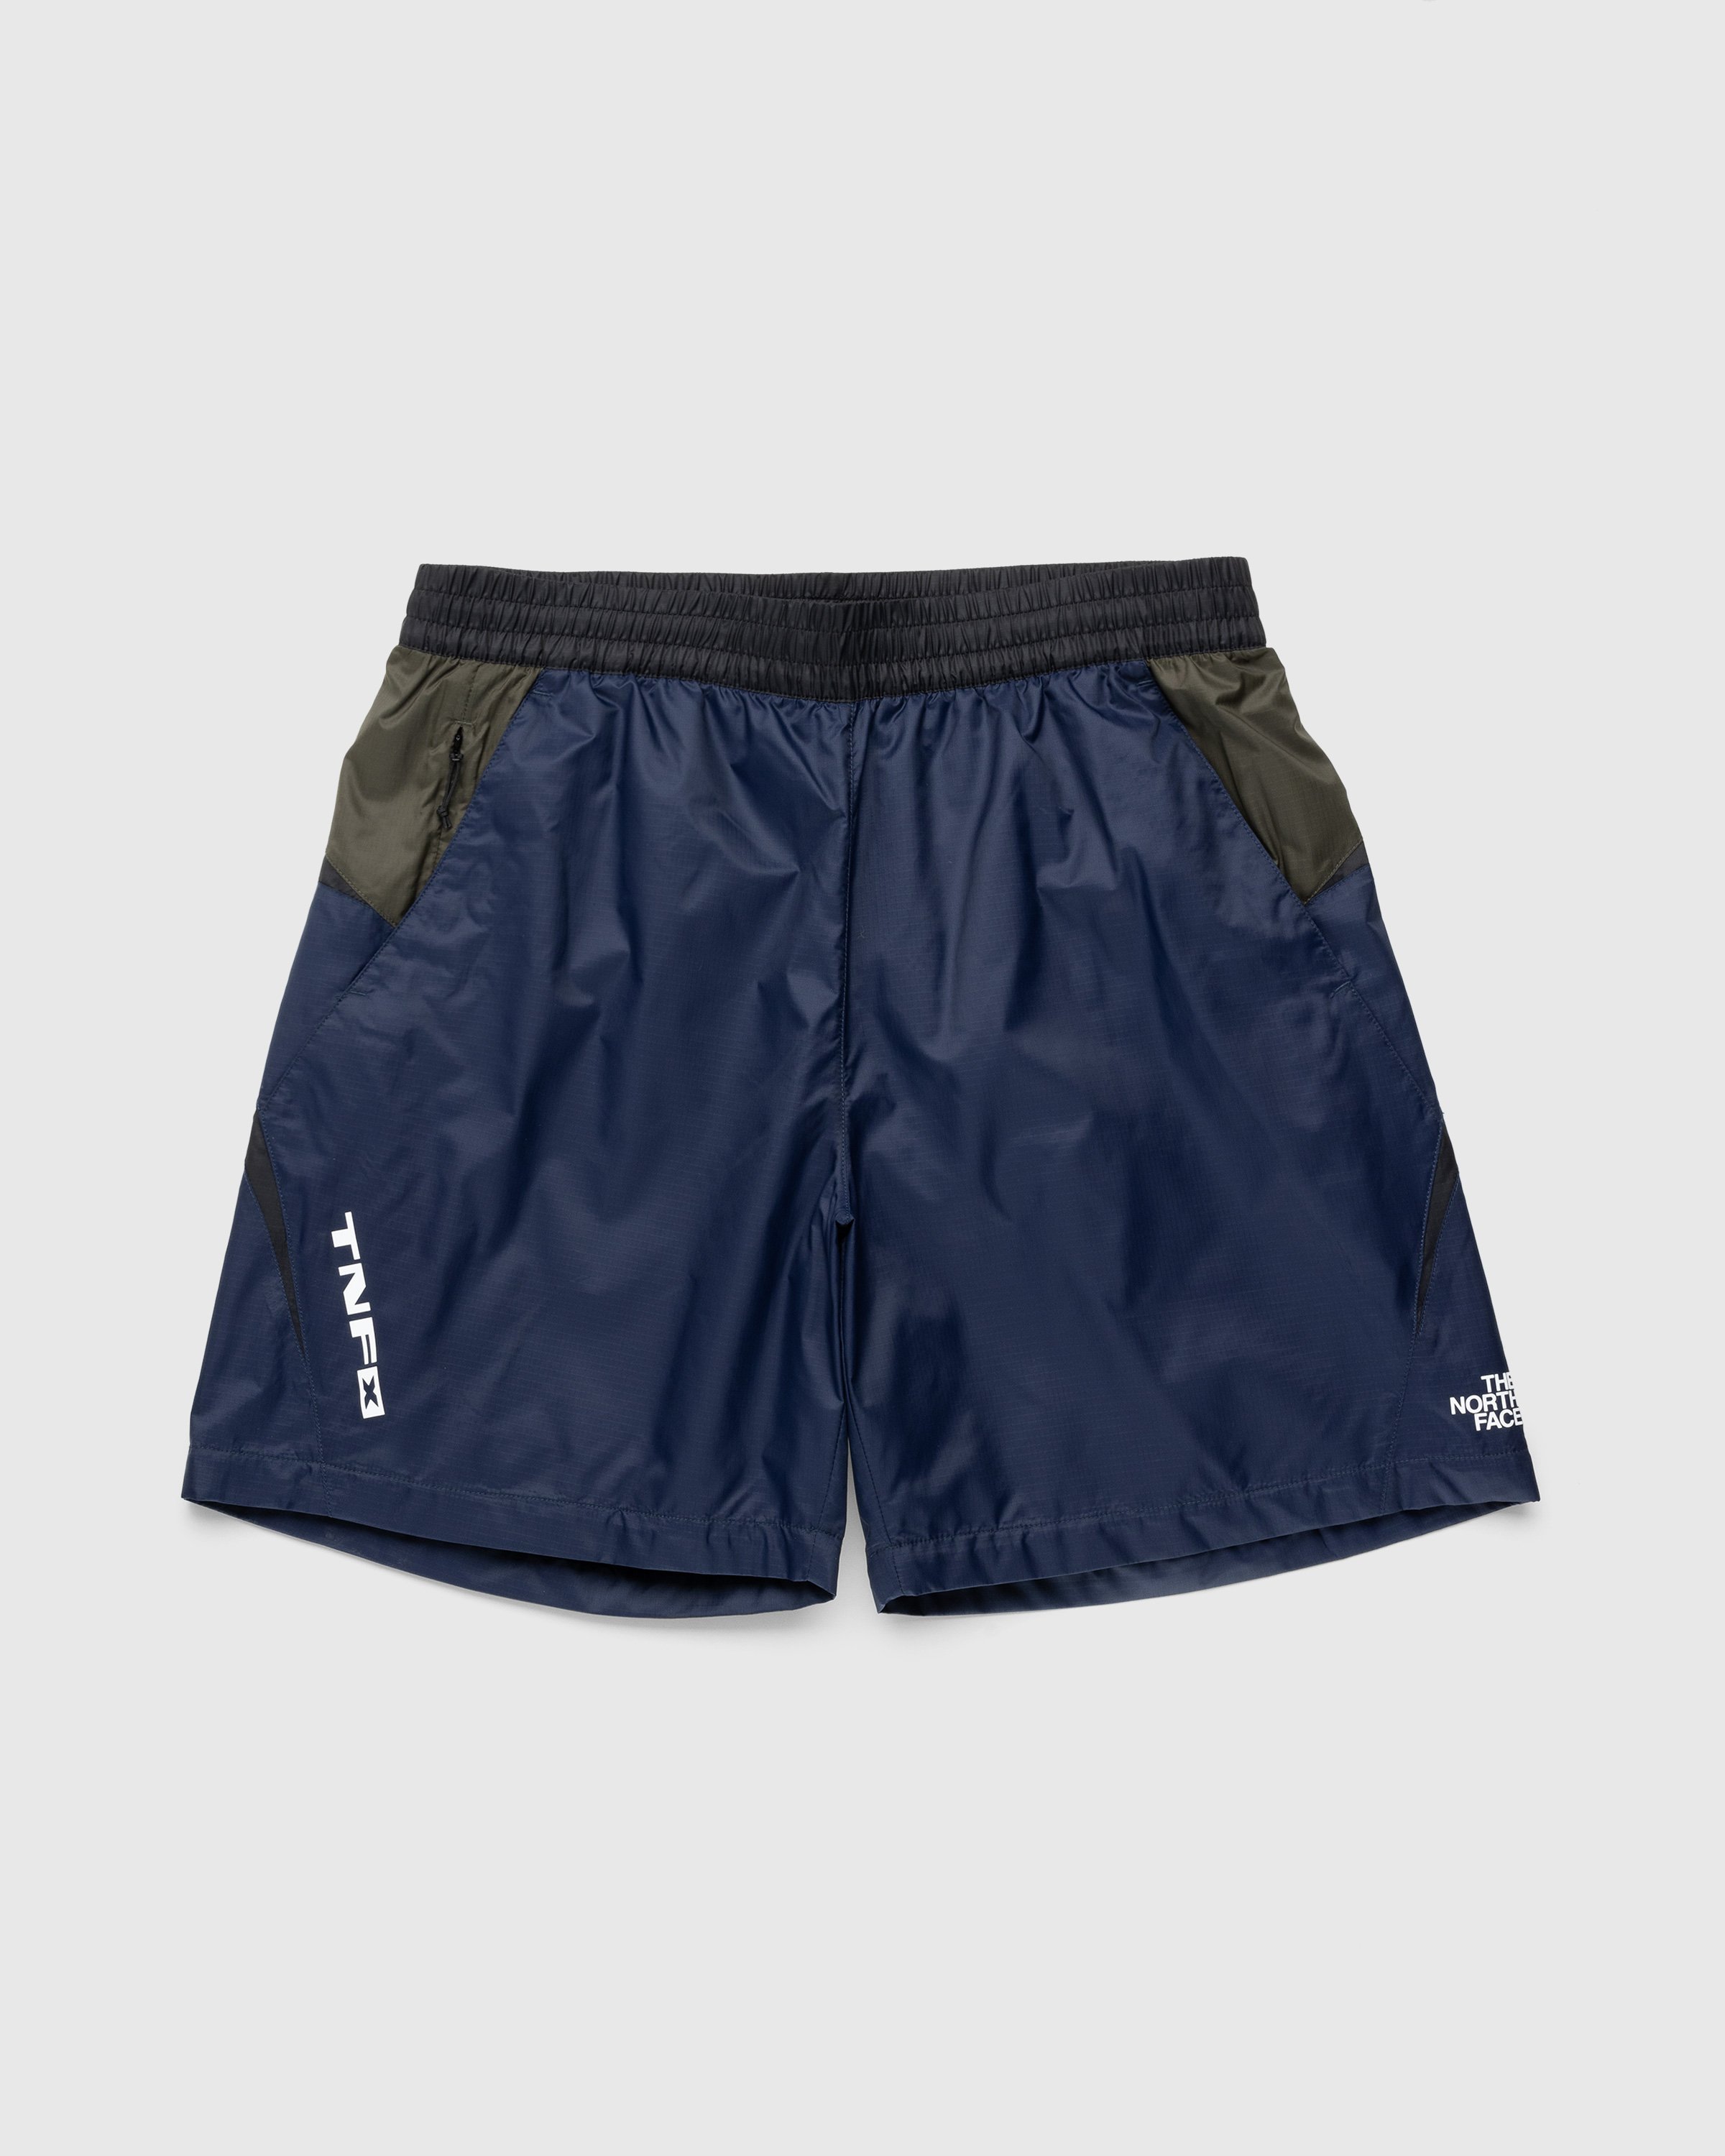 The North Face – TNF X Shorts Blue | Highsnobiety Shop